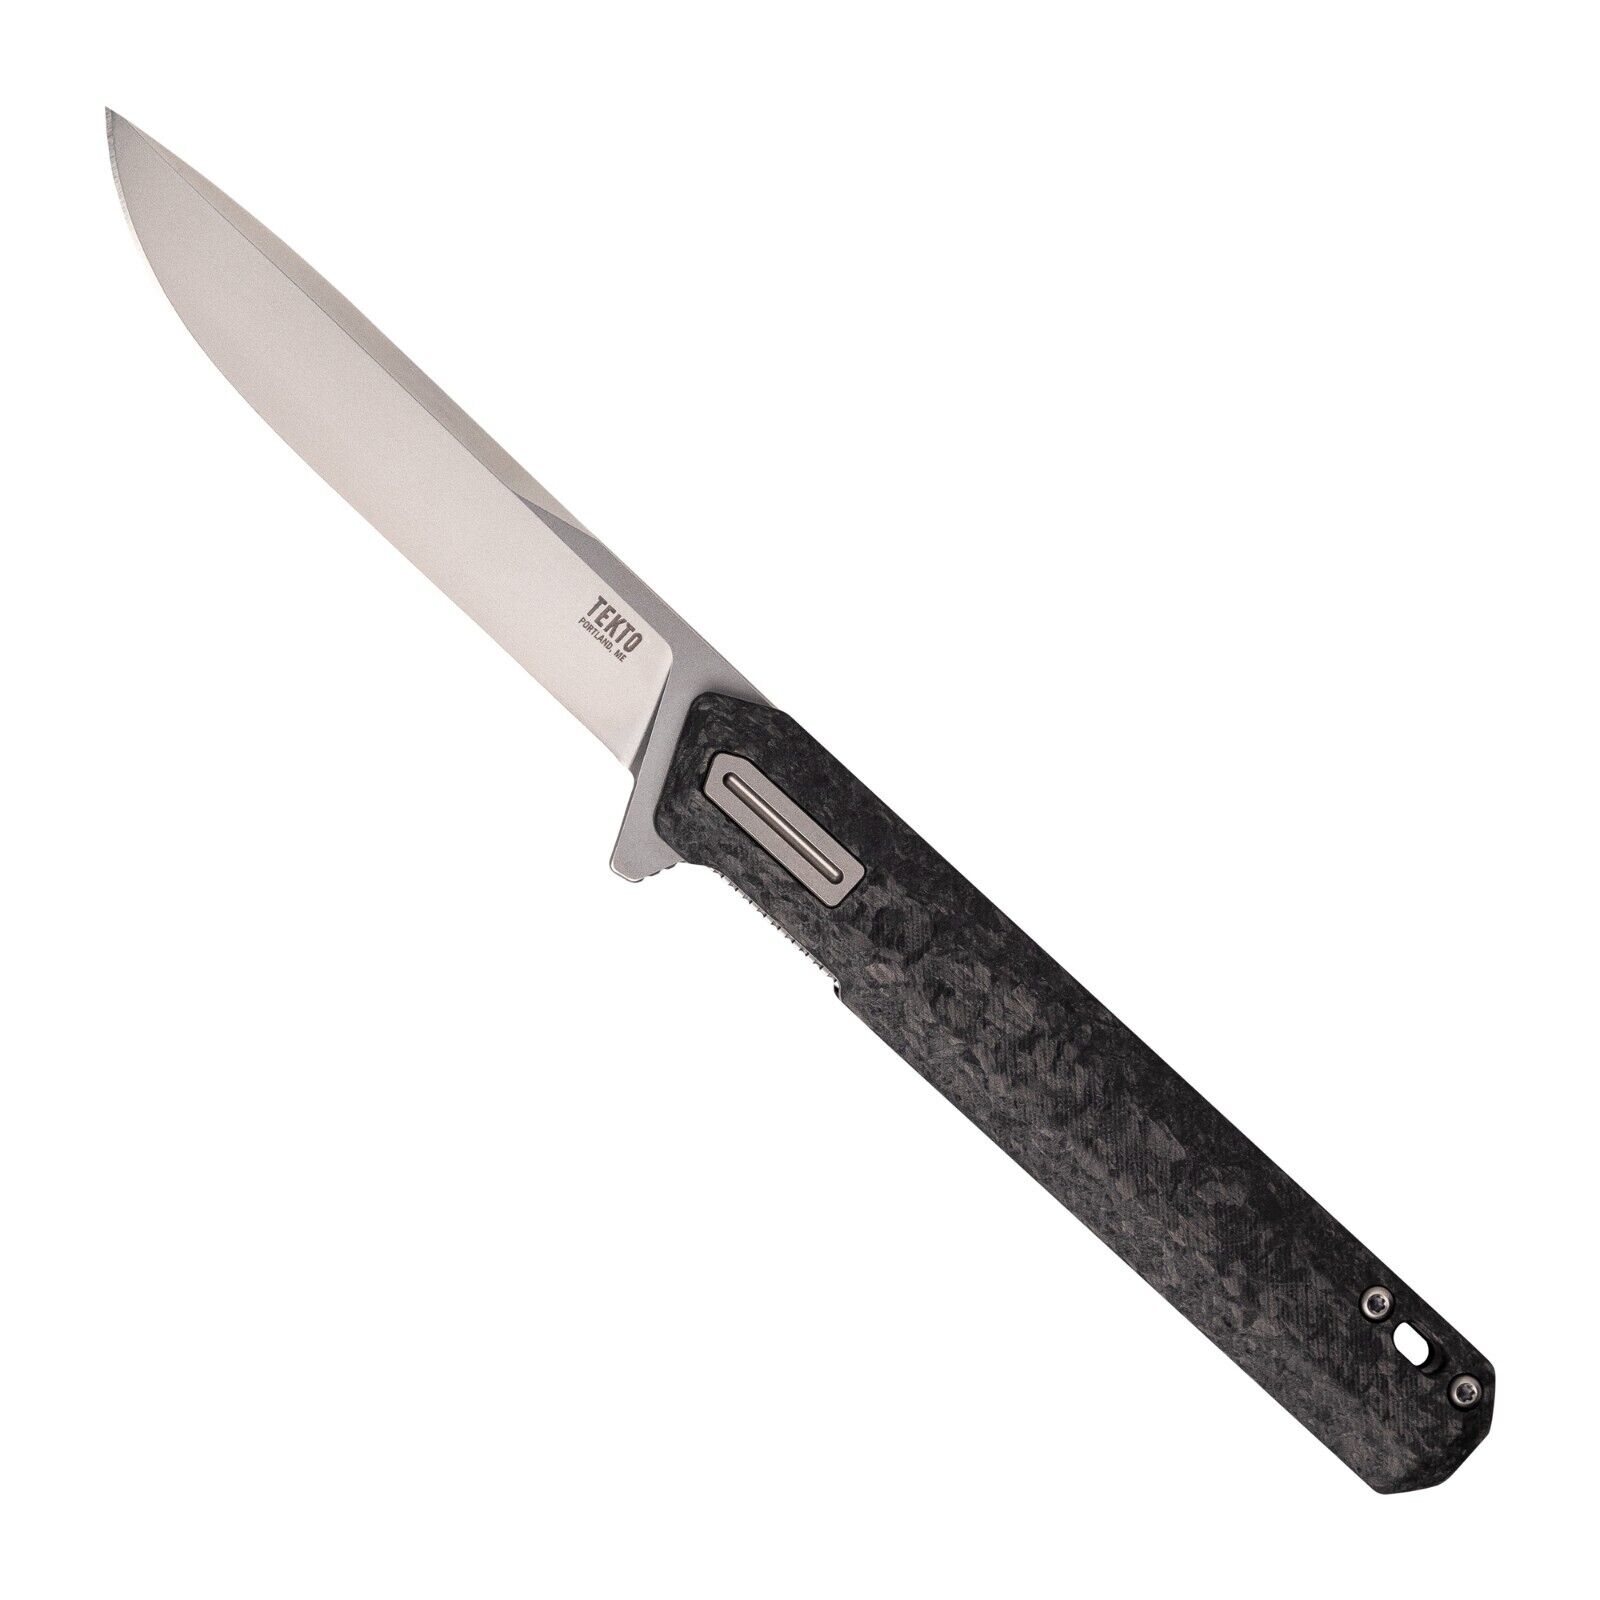 TEKTO F2 Bravo Folding Knife Forged Carbon Handle with Silver Accents, D2 Steel